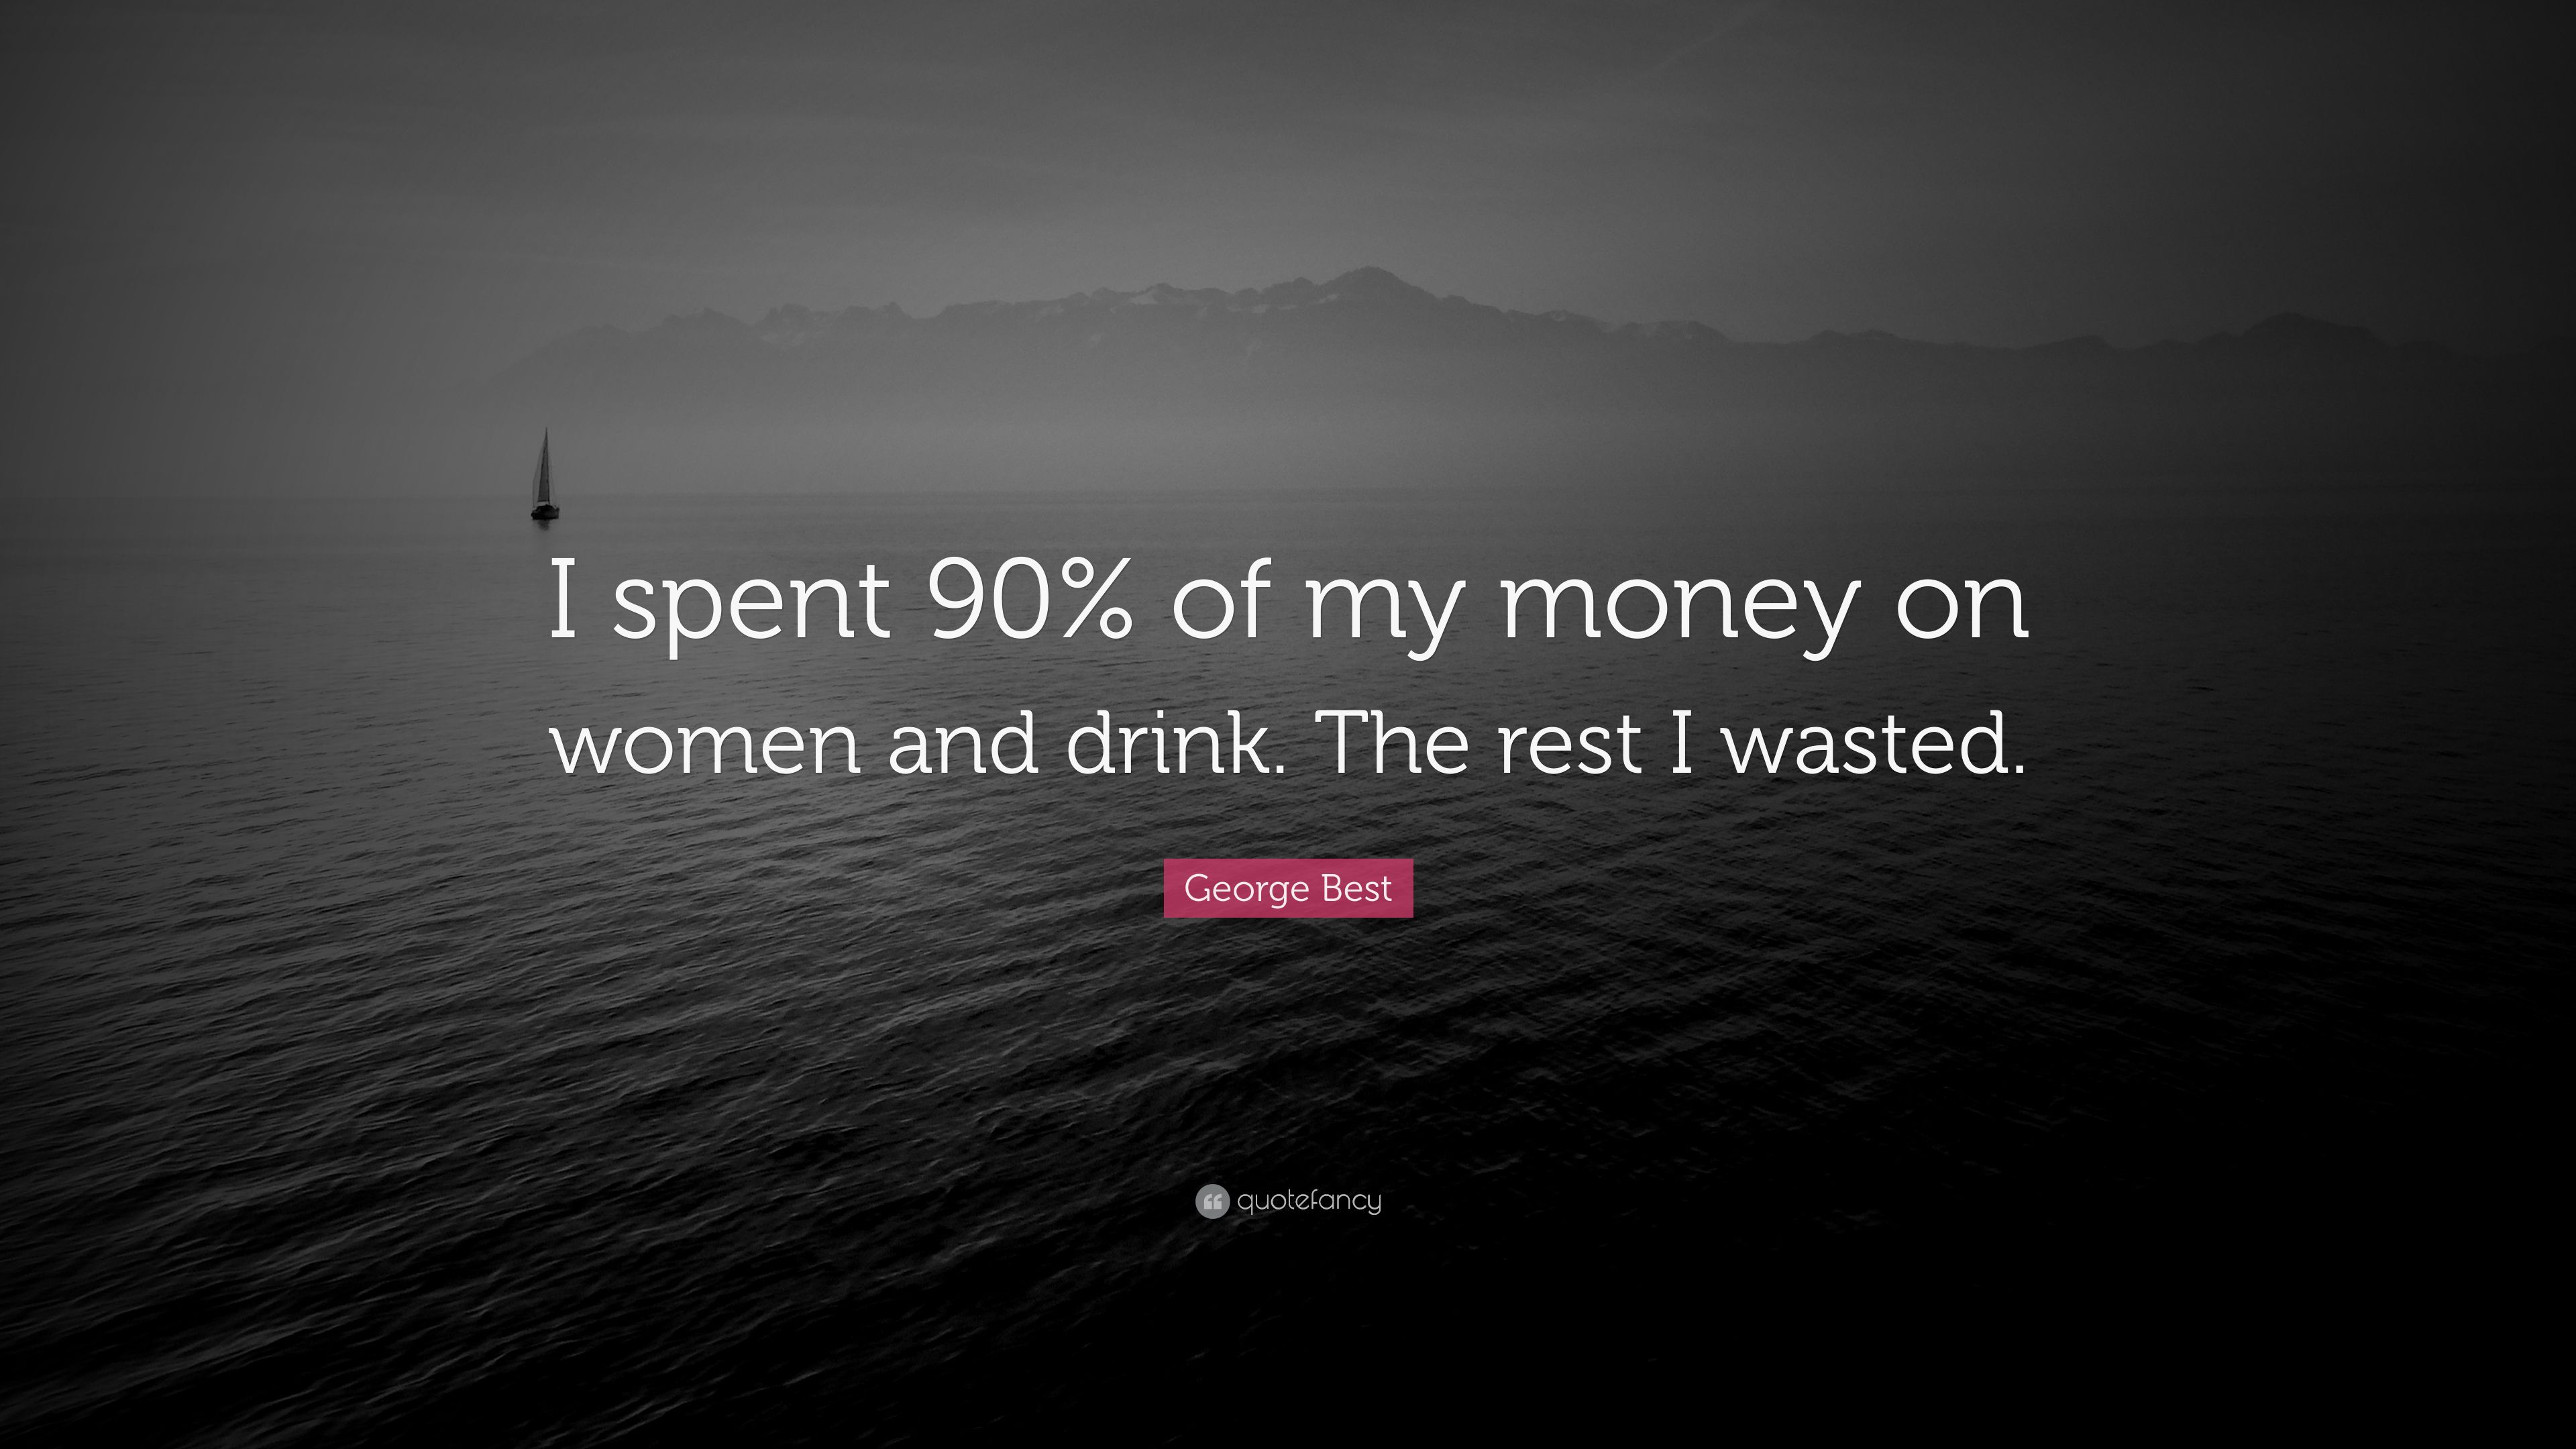 George Best Quote: “I spent 90% of my money on women and drink